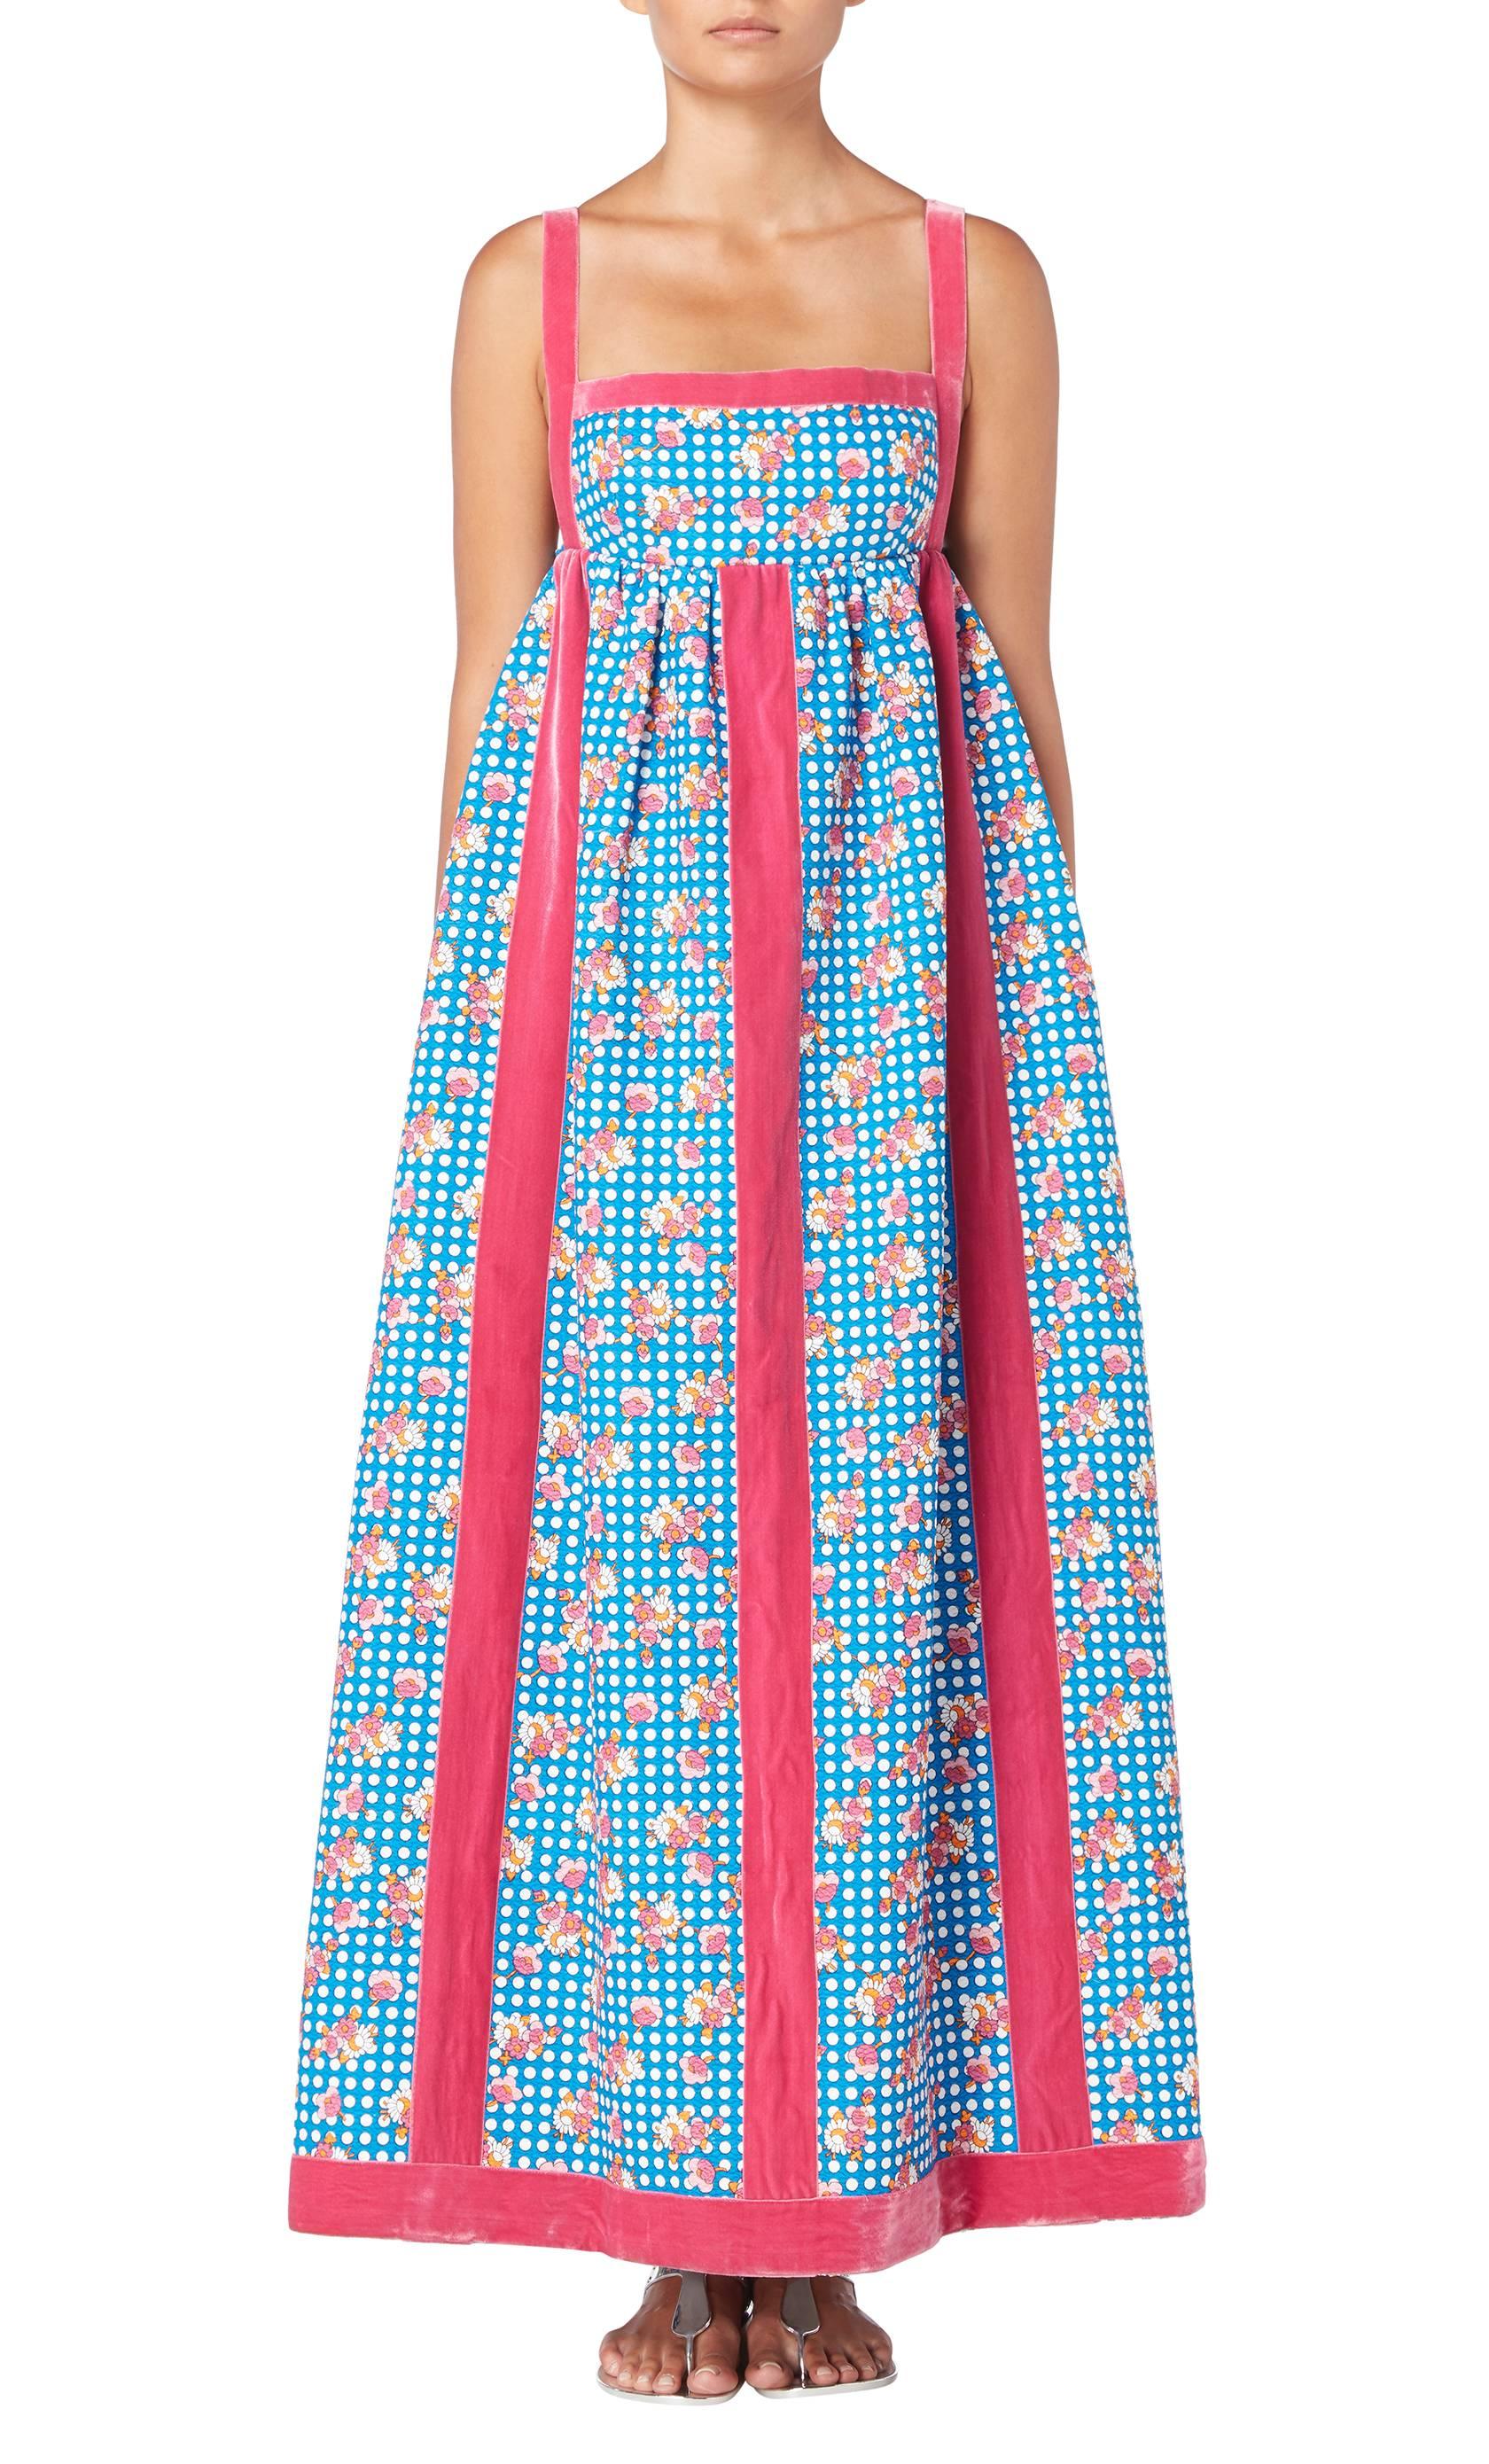 A great way of incorporating colour into a summer wardrobe, this Oscar de la Renta maxi dress is playful and fun! Constructed in bright blue textured cotton with a white polka dot and pink floral print, the dress features pink velvet stripes down